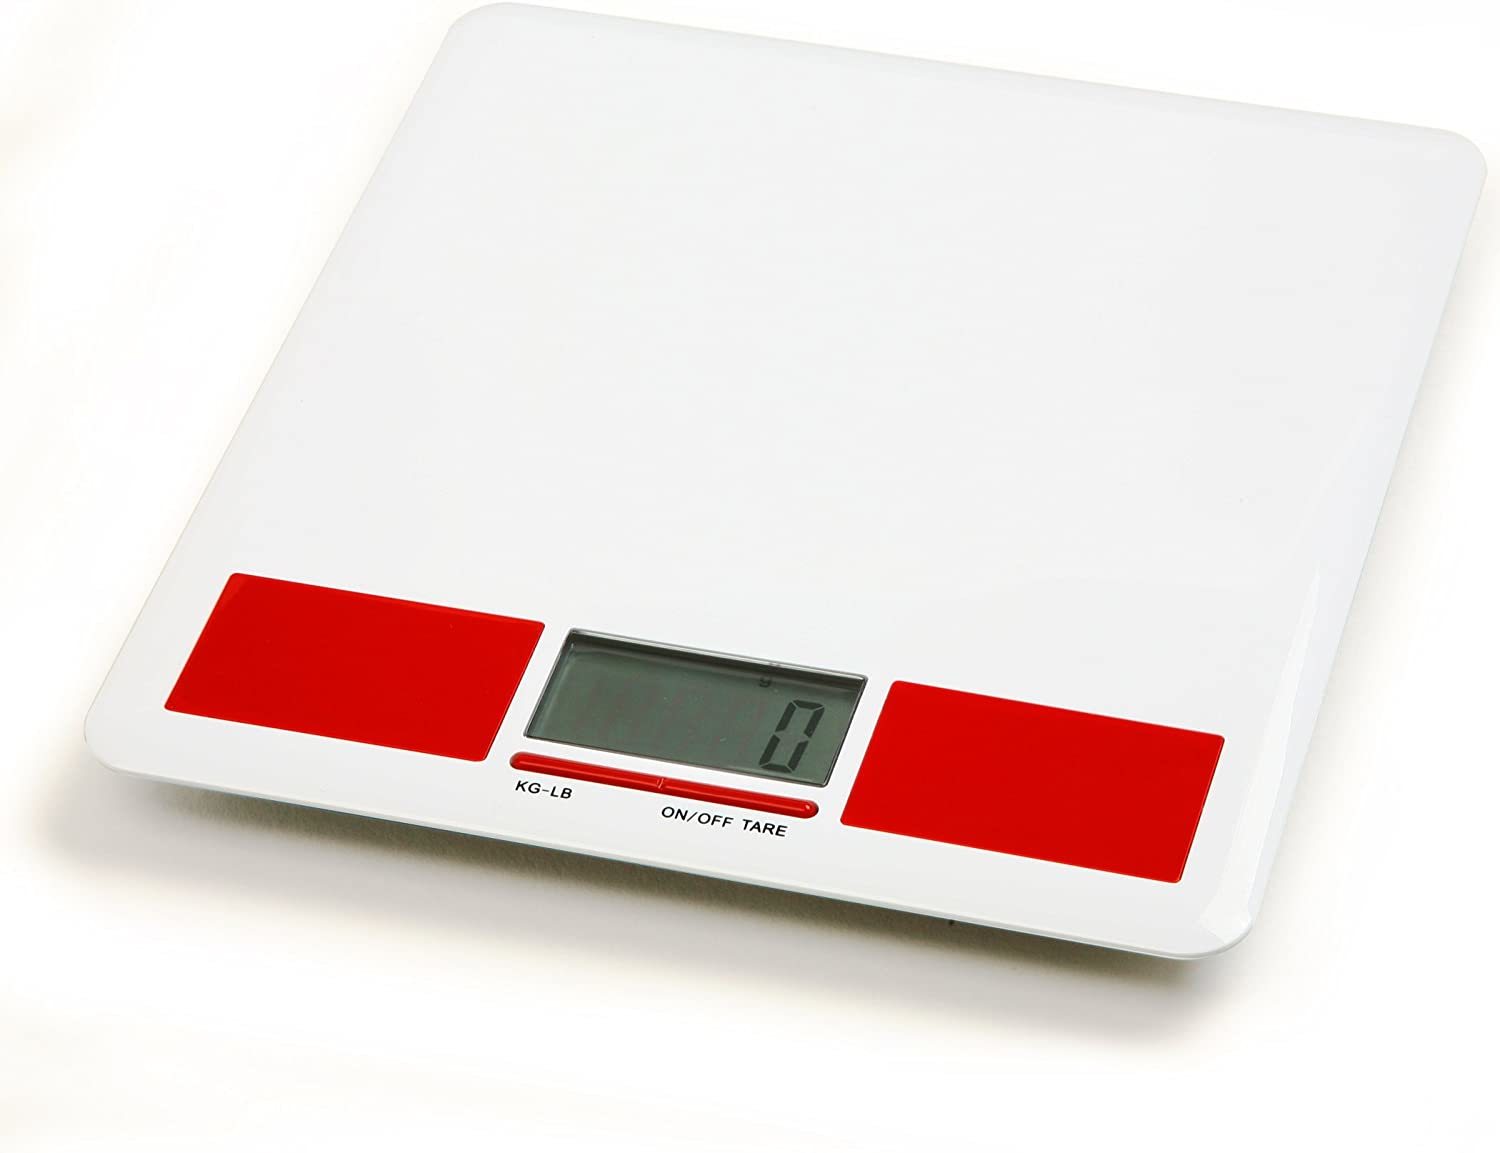 Norpro Digital Diet Kitchen Scale Weighs Up To 11 Pounds (5 Kg), White-Red - $36.99